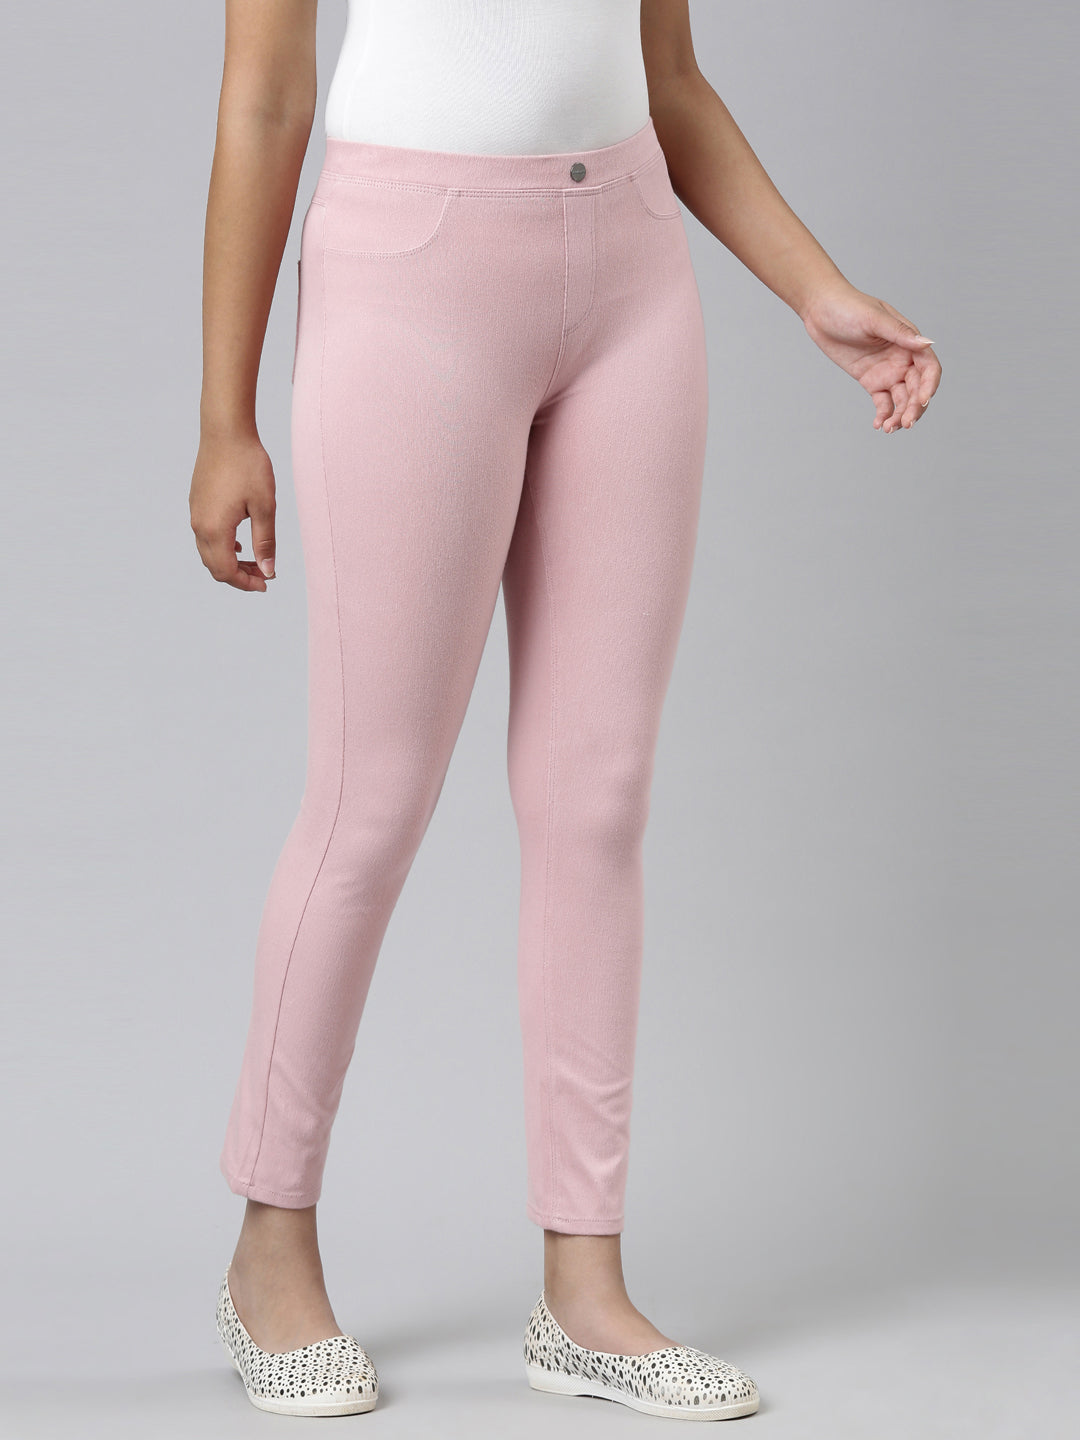 Spanx Jean ish Ankle Leggings Womens Small Light Pink Stretch